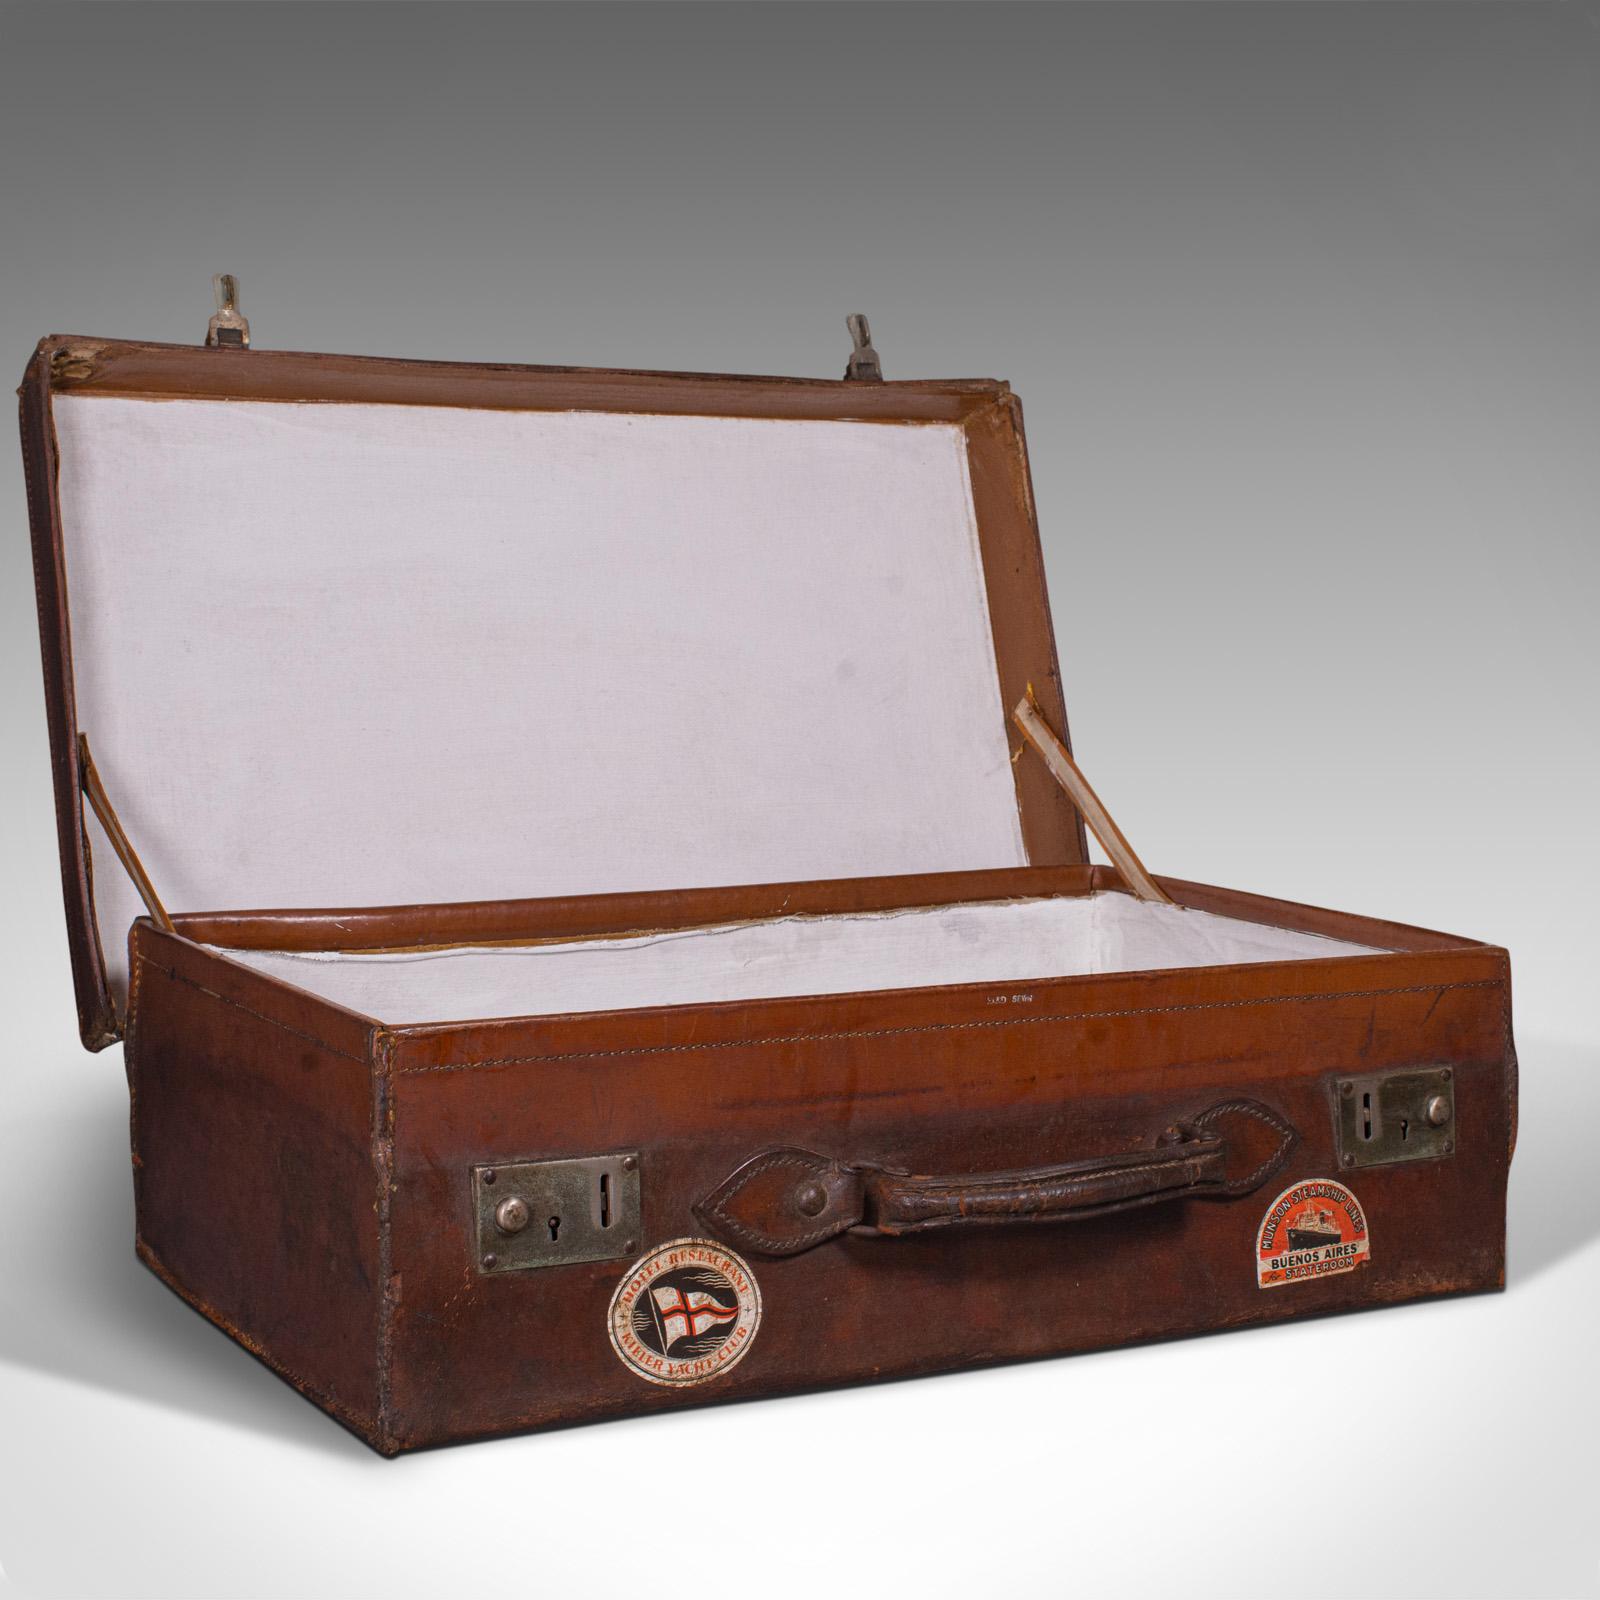 This is an antique gentleman's suitcase. An English, leather overnight case or lightweight travel bag, dating to the Edwardian period, circa 1910.

Graced with decades of travelling tales
Displays a desirable aged patina
Quality leather in rich